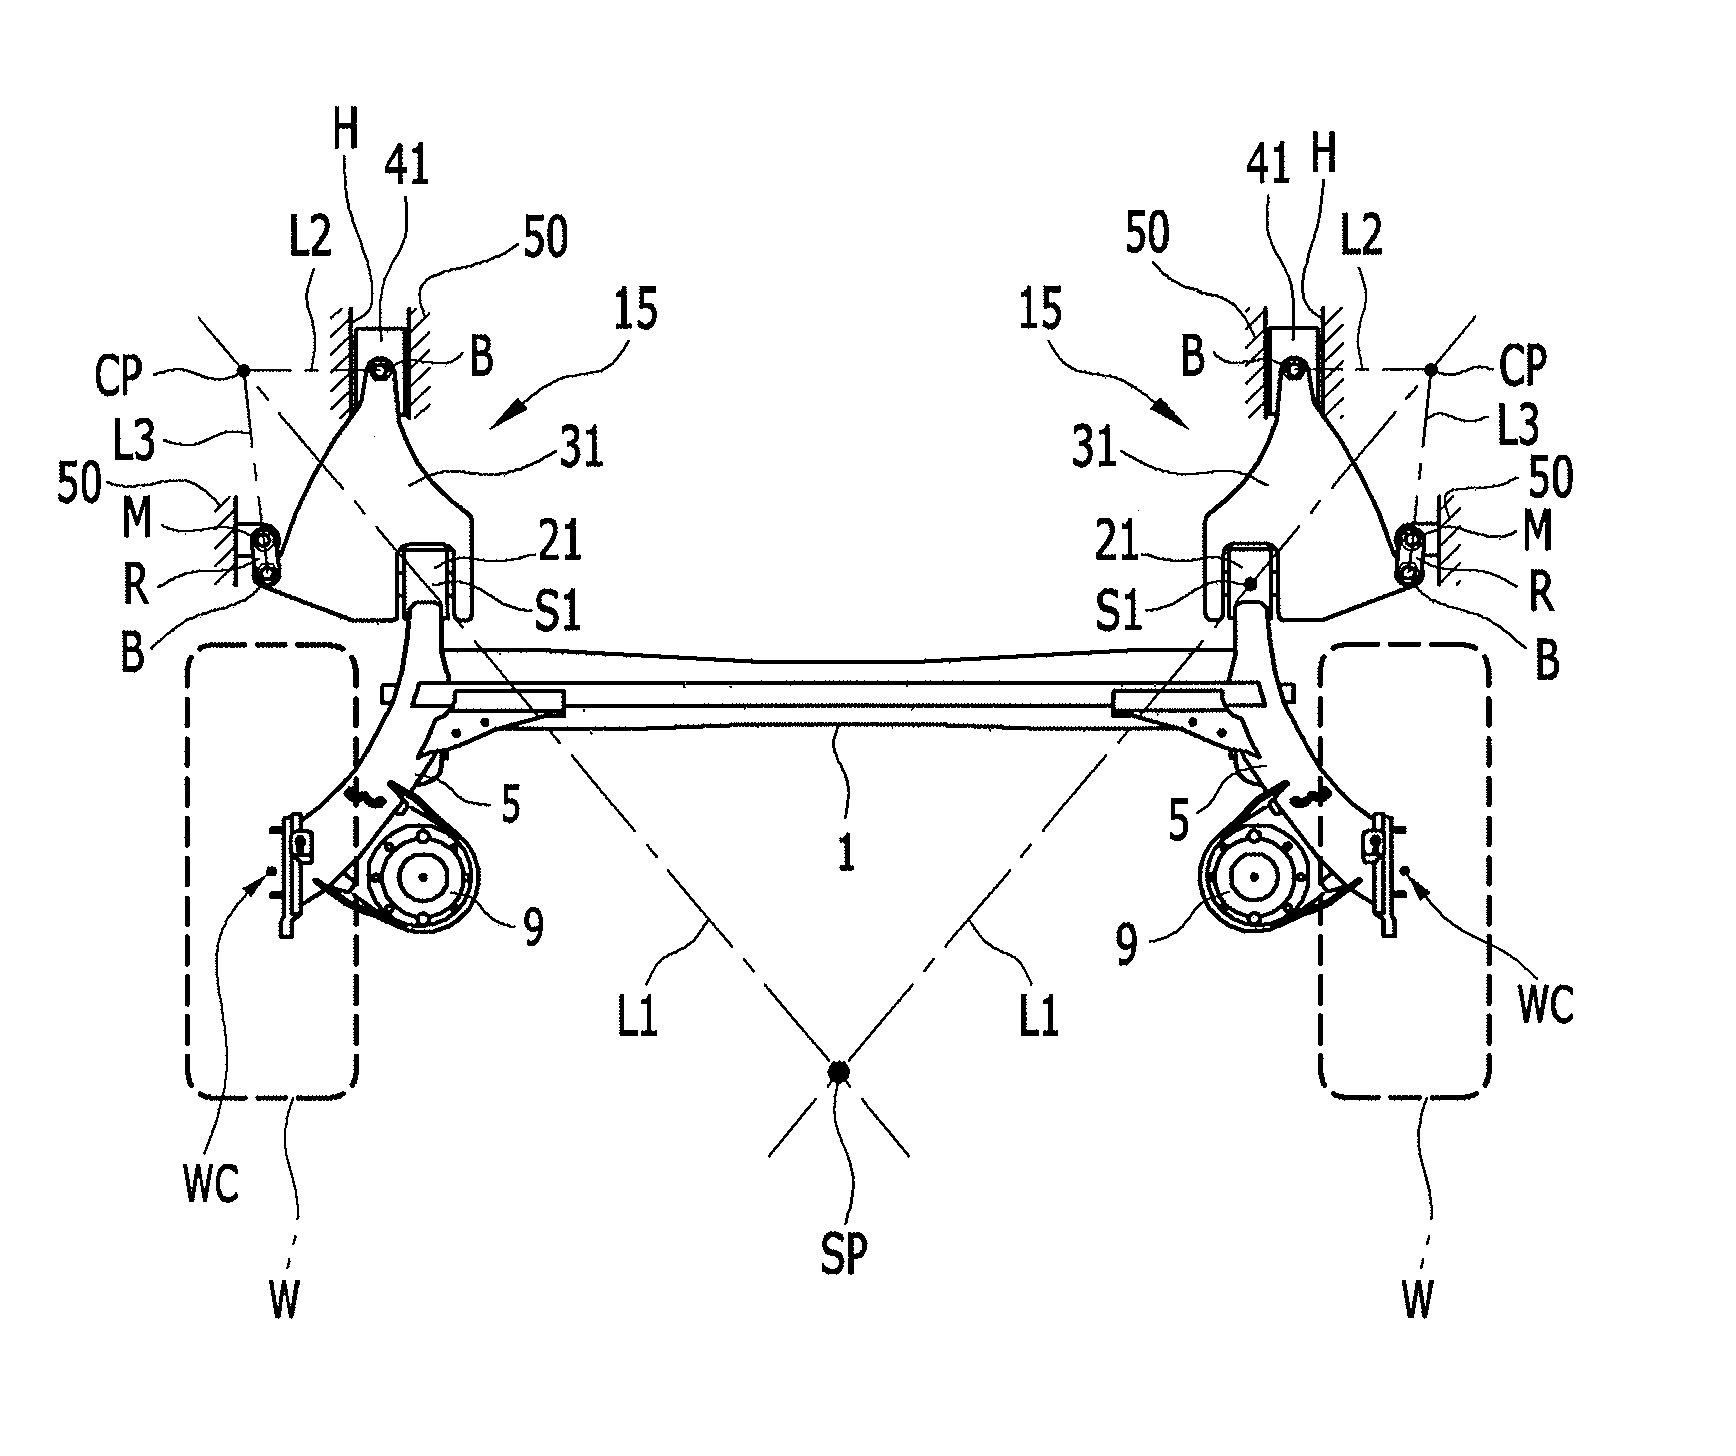 Coupled torsion beam axle type suspension system